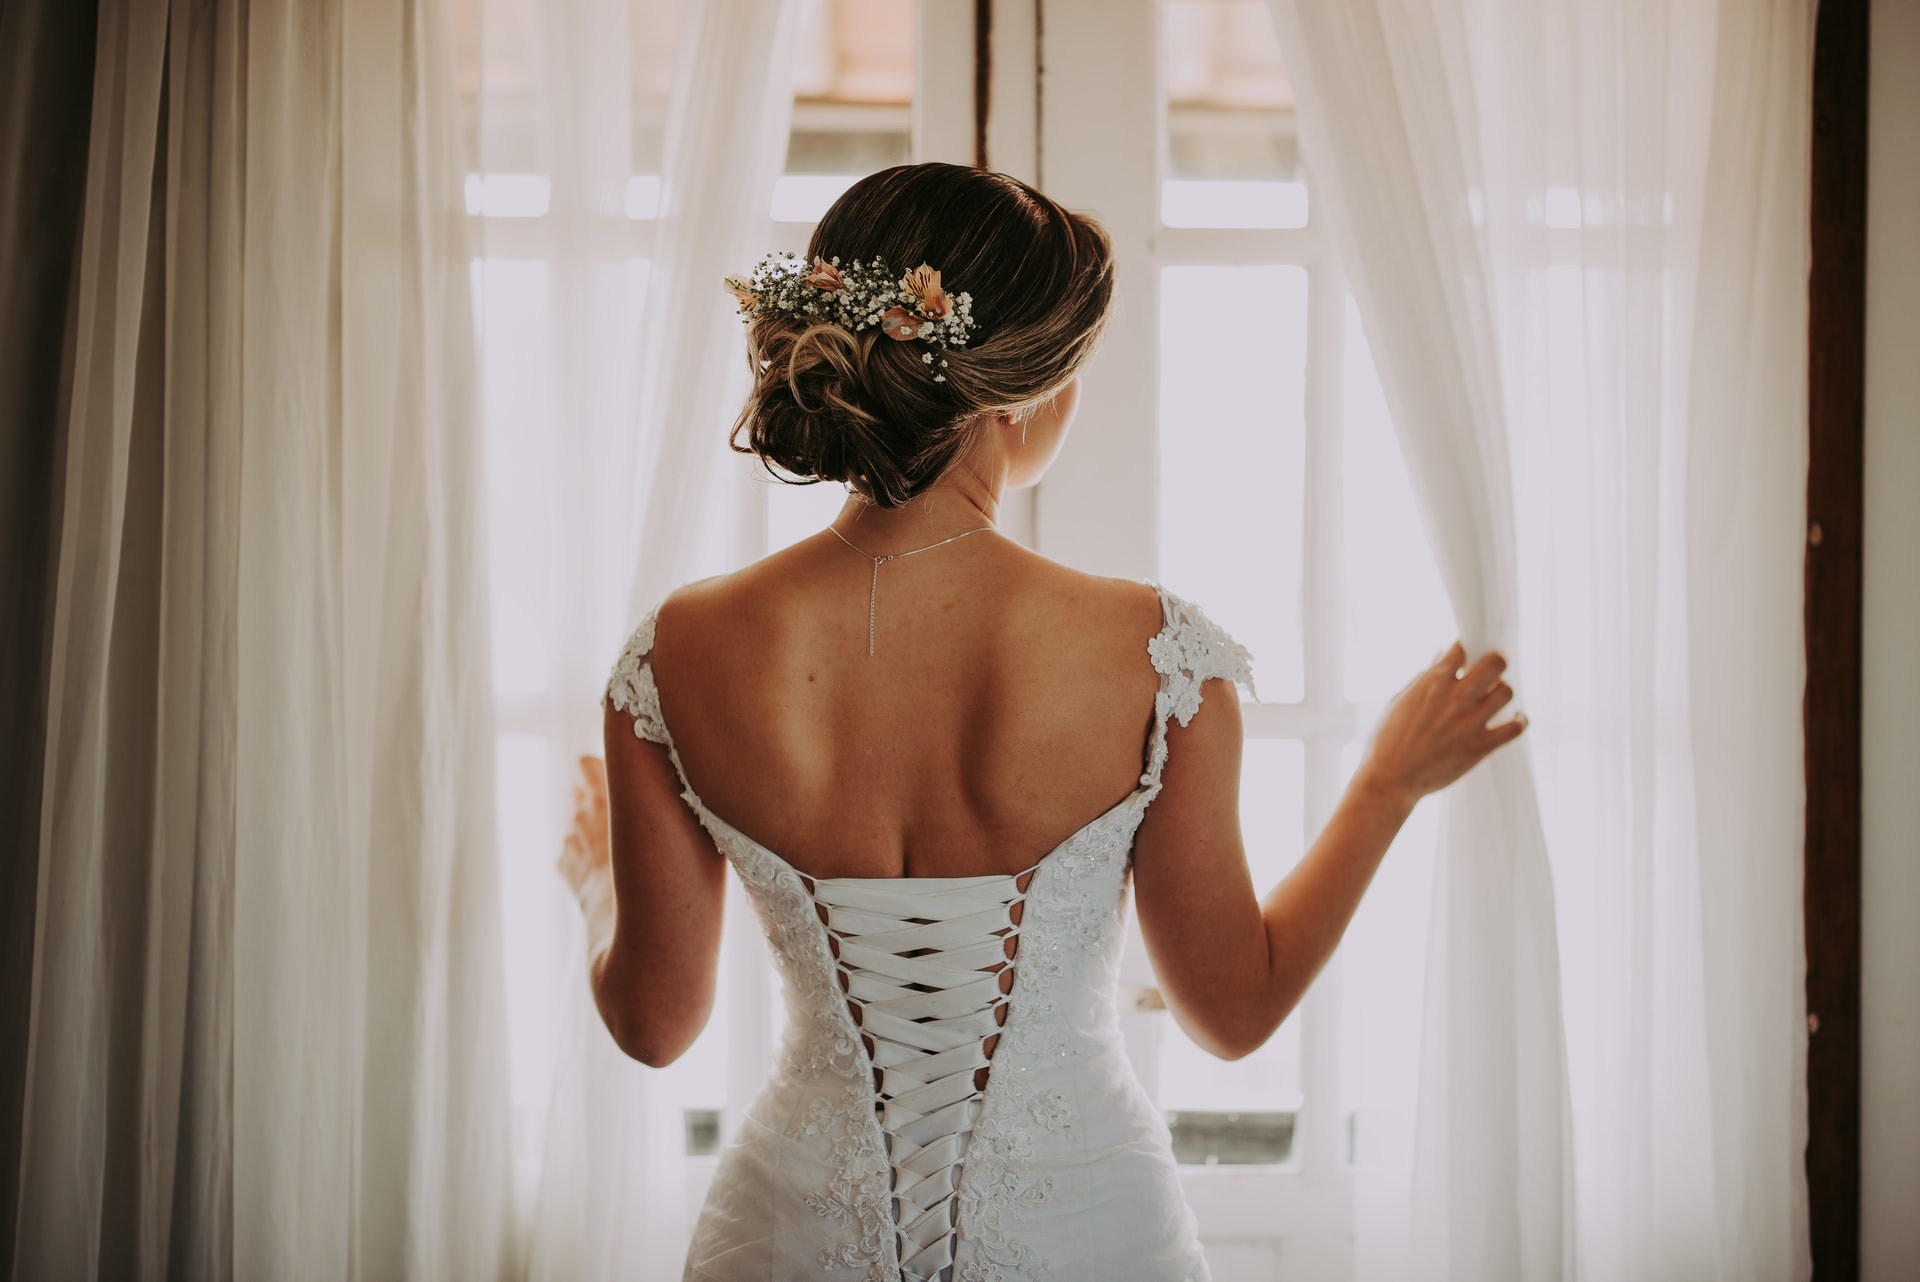 How to Add a Corset Back to a Wedding Dress?